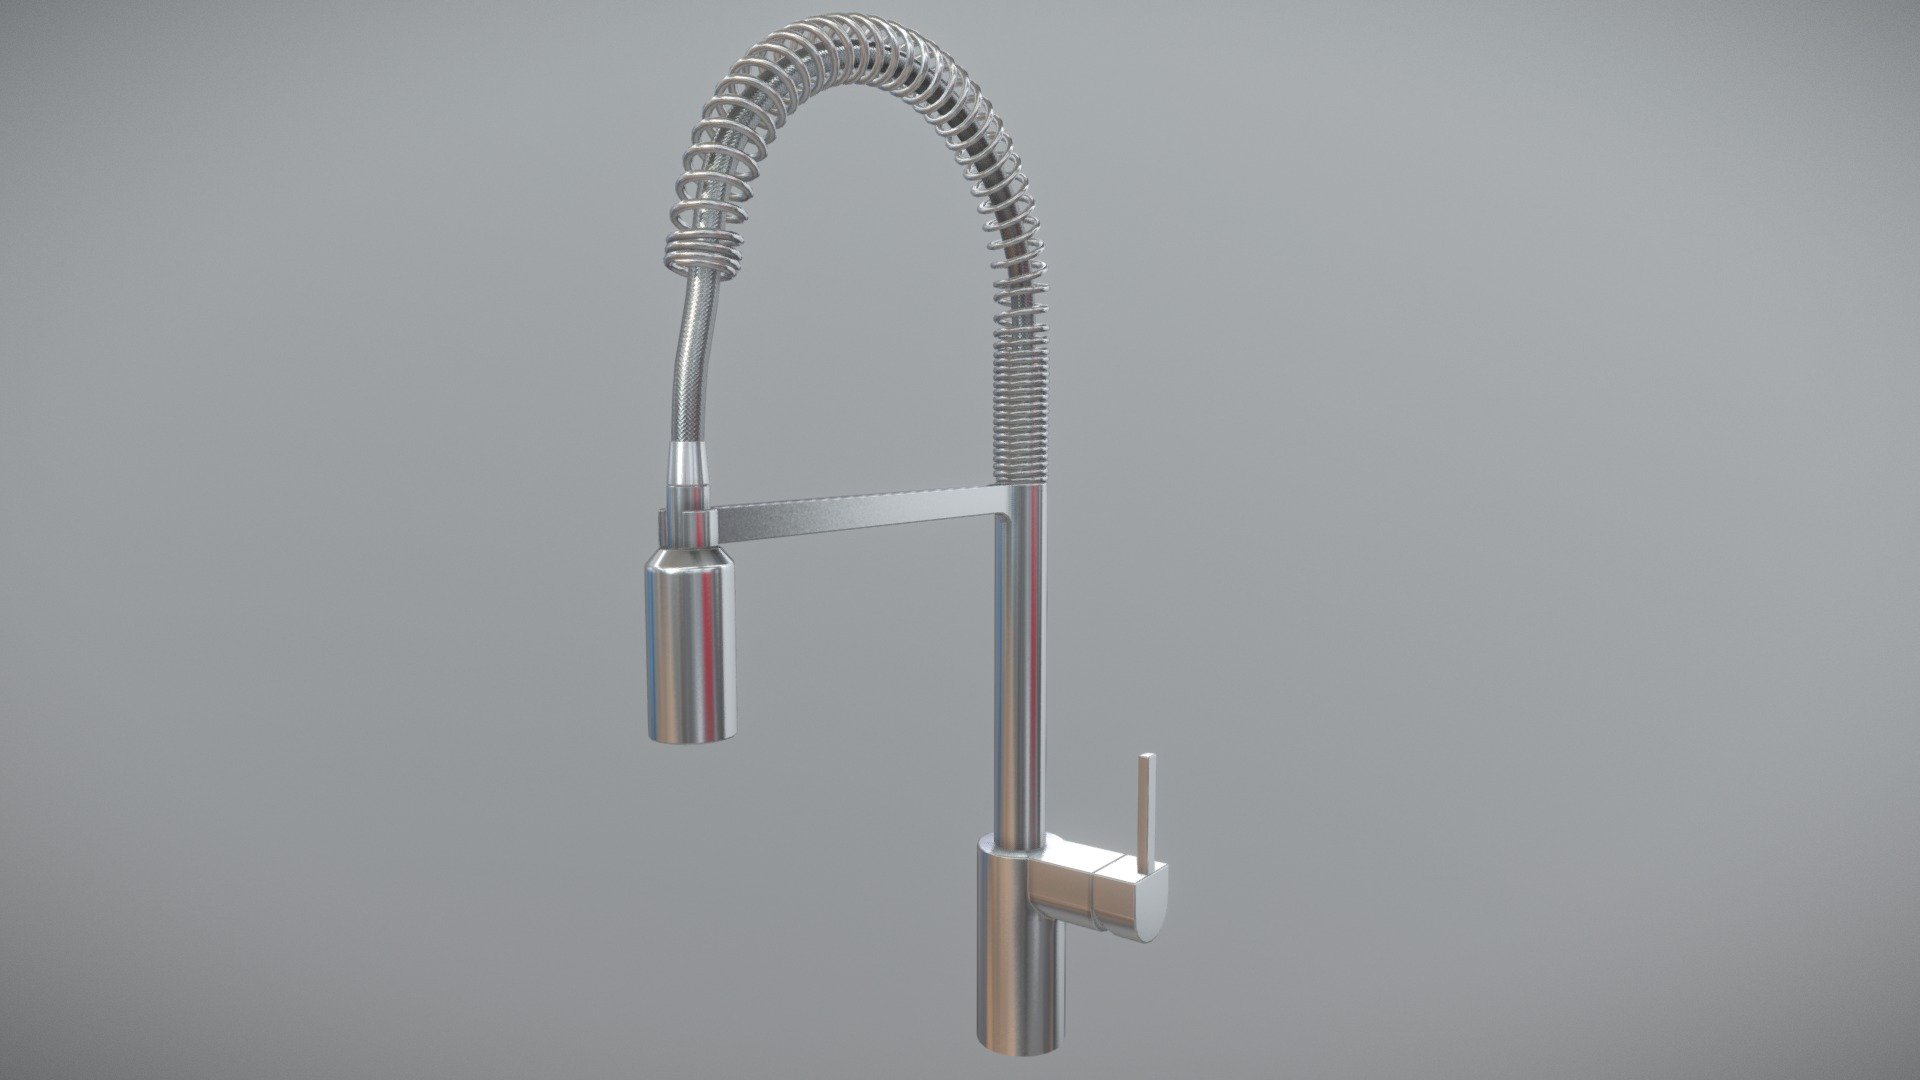 Made in Maya and Substance Painter for use in UE4

Arch Viz Sink Faucet made for use in realtime rendering such as UE4 or Unity. Also Suitable for non-realtime renderers.

-Game/Realtime Rendering ready Low Poly

-PBR Textures (Albedo,AO,Normal,Roughness,Metallic) - Moen Align One-Handle Spring Kitchen Faucet - Buy Royalty Free 3D model by InfuseStudio 3d model